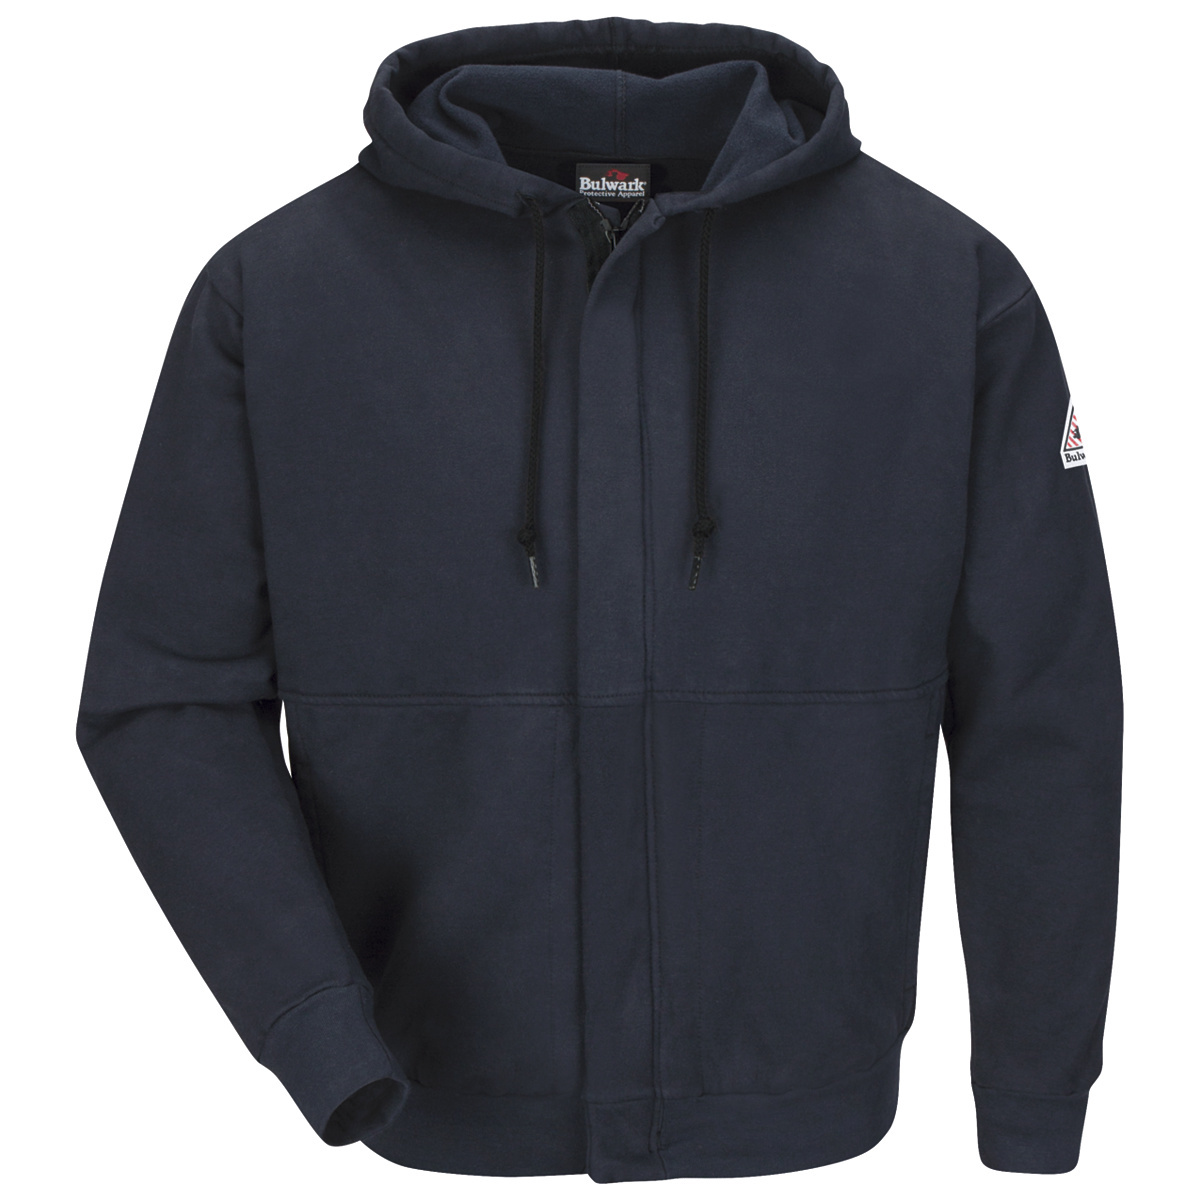 Bulwark® 5X Tall Navy Blue Cotton/Spandex Brushed Fleece Flame Resistant Hooded Sweatshirt With Zipper Front Closure